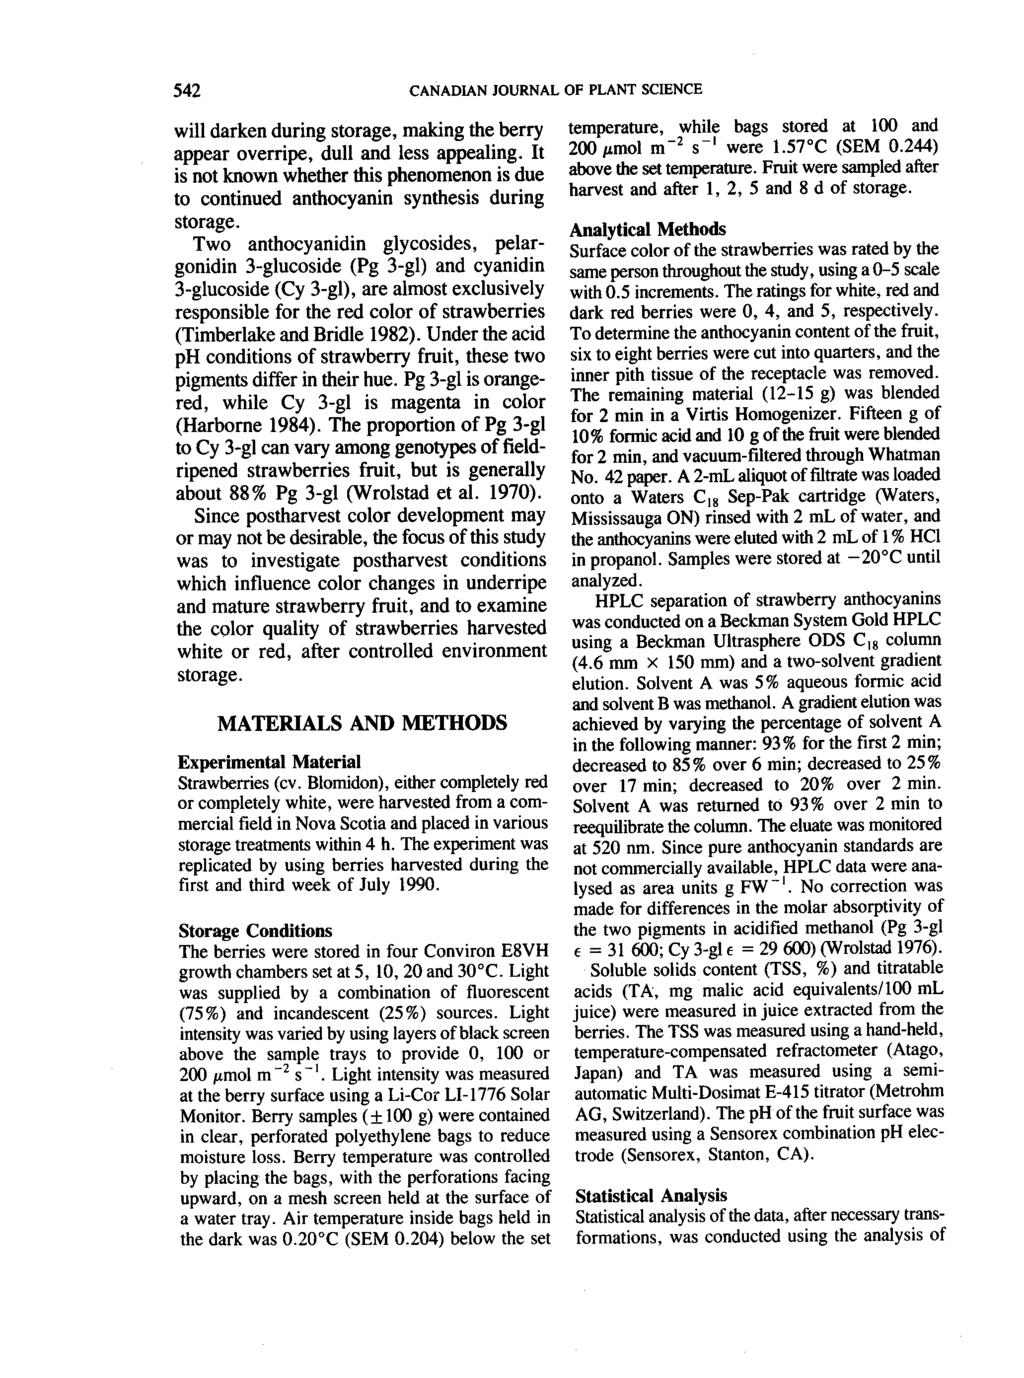 CANADAN JOURNAL O PLANT SCENCE Can. J. Plant Sci. Dwnladed frm www.nrcresearchpress.cm by 148.251.232.83 n 5/3/18 r persnal use nly.